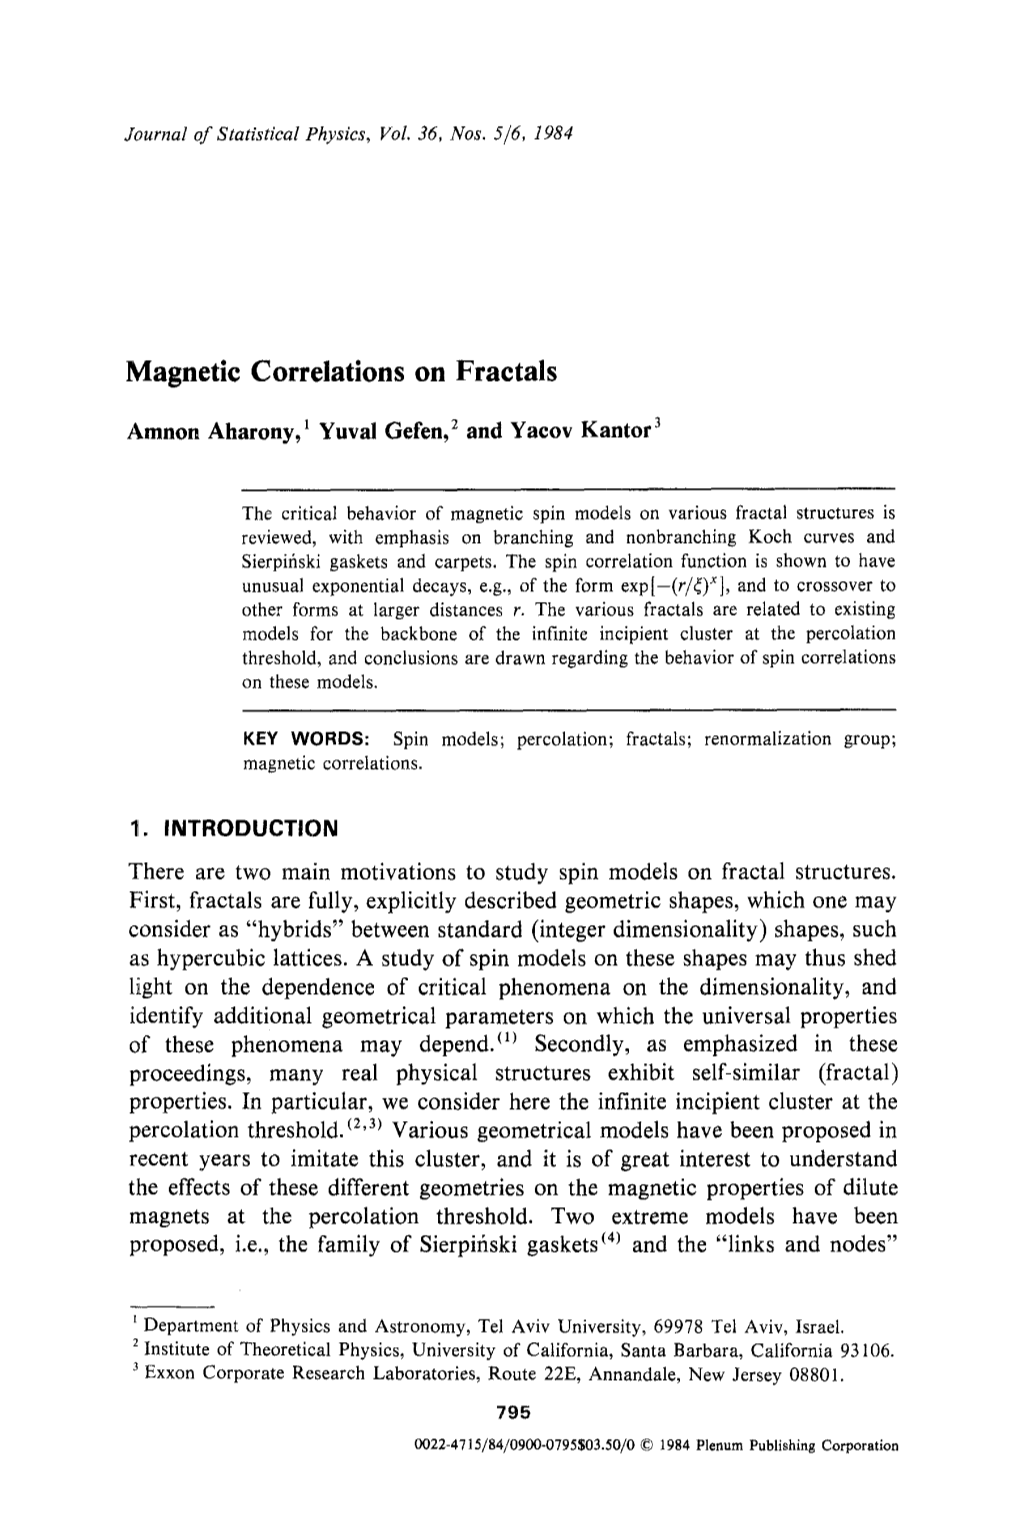 Magnetic Correlations on Fractals